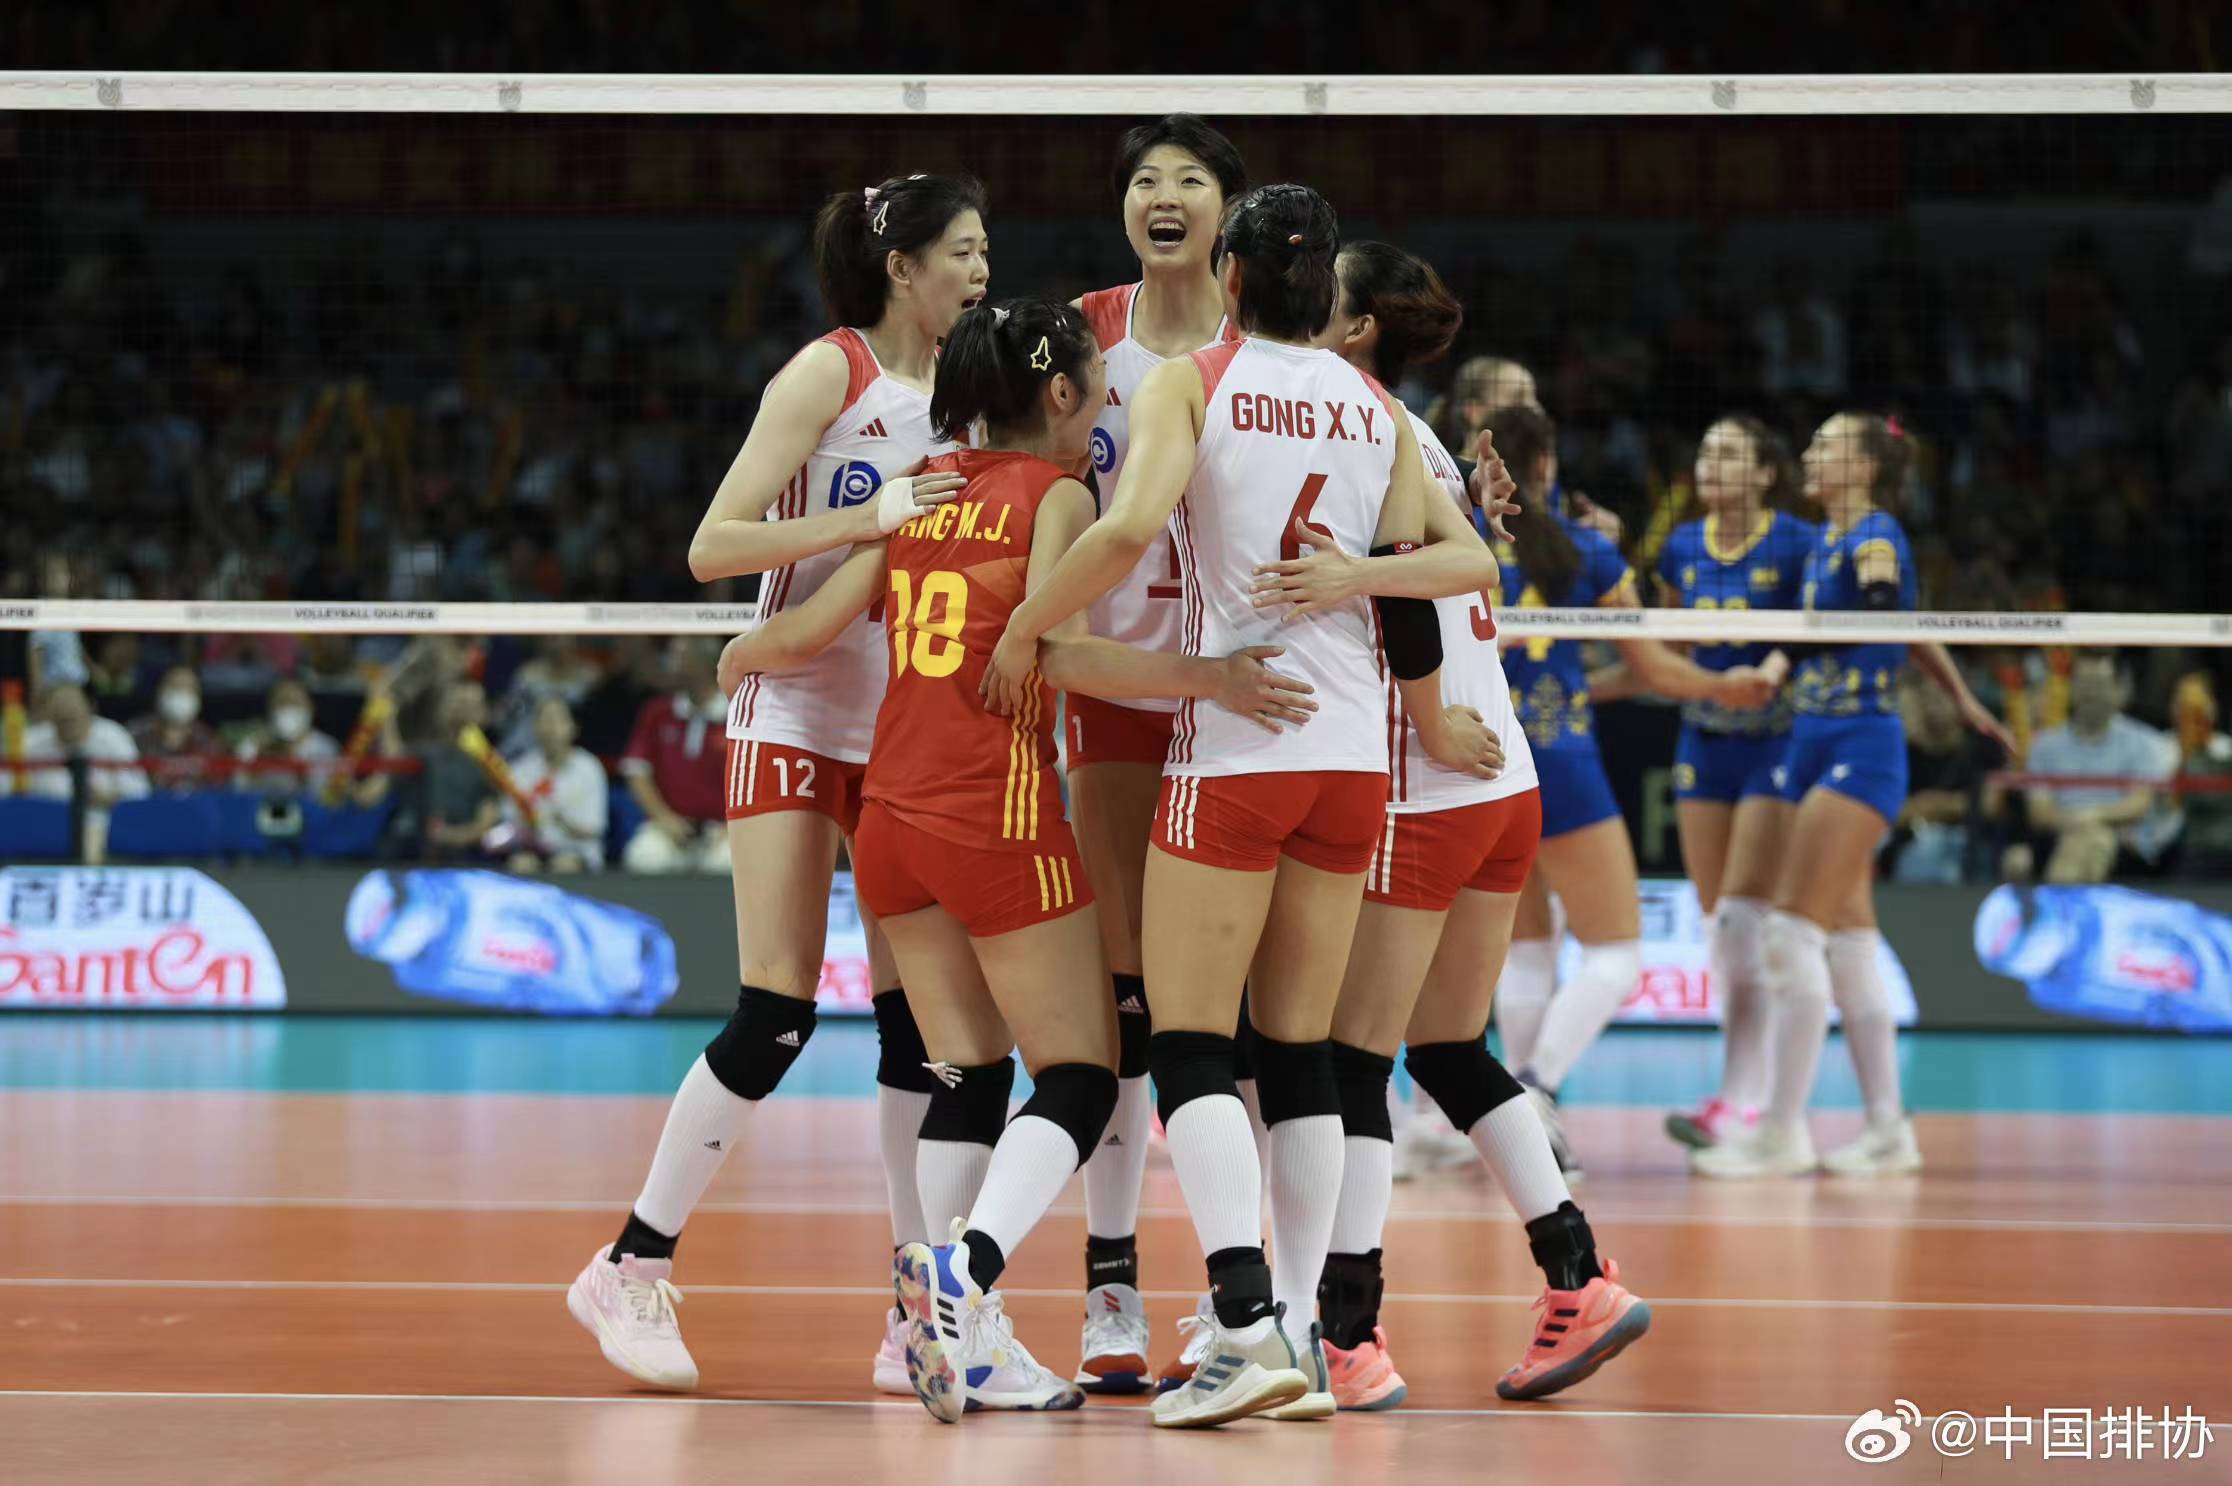 Get off to a good start in the Olympic qualification race!, Chinese women's volleyball team wins over Ukrainian team